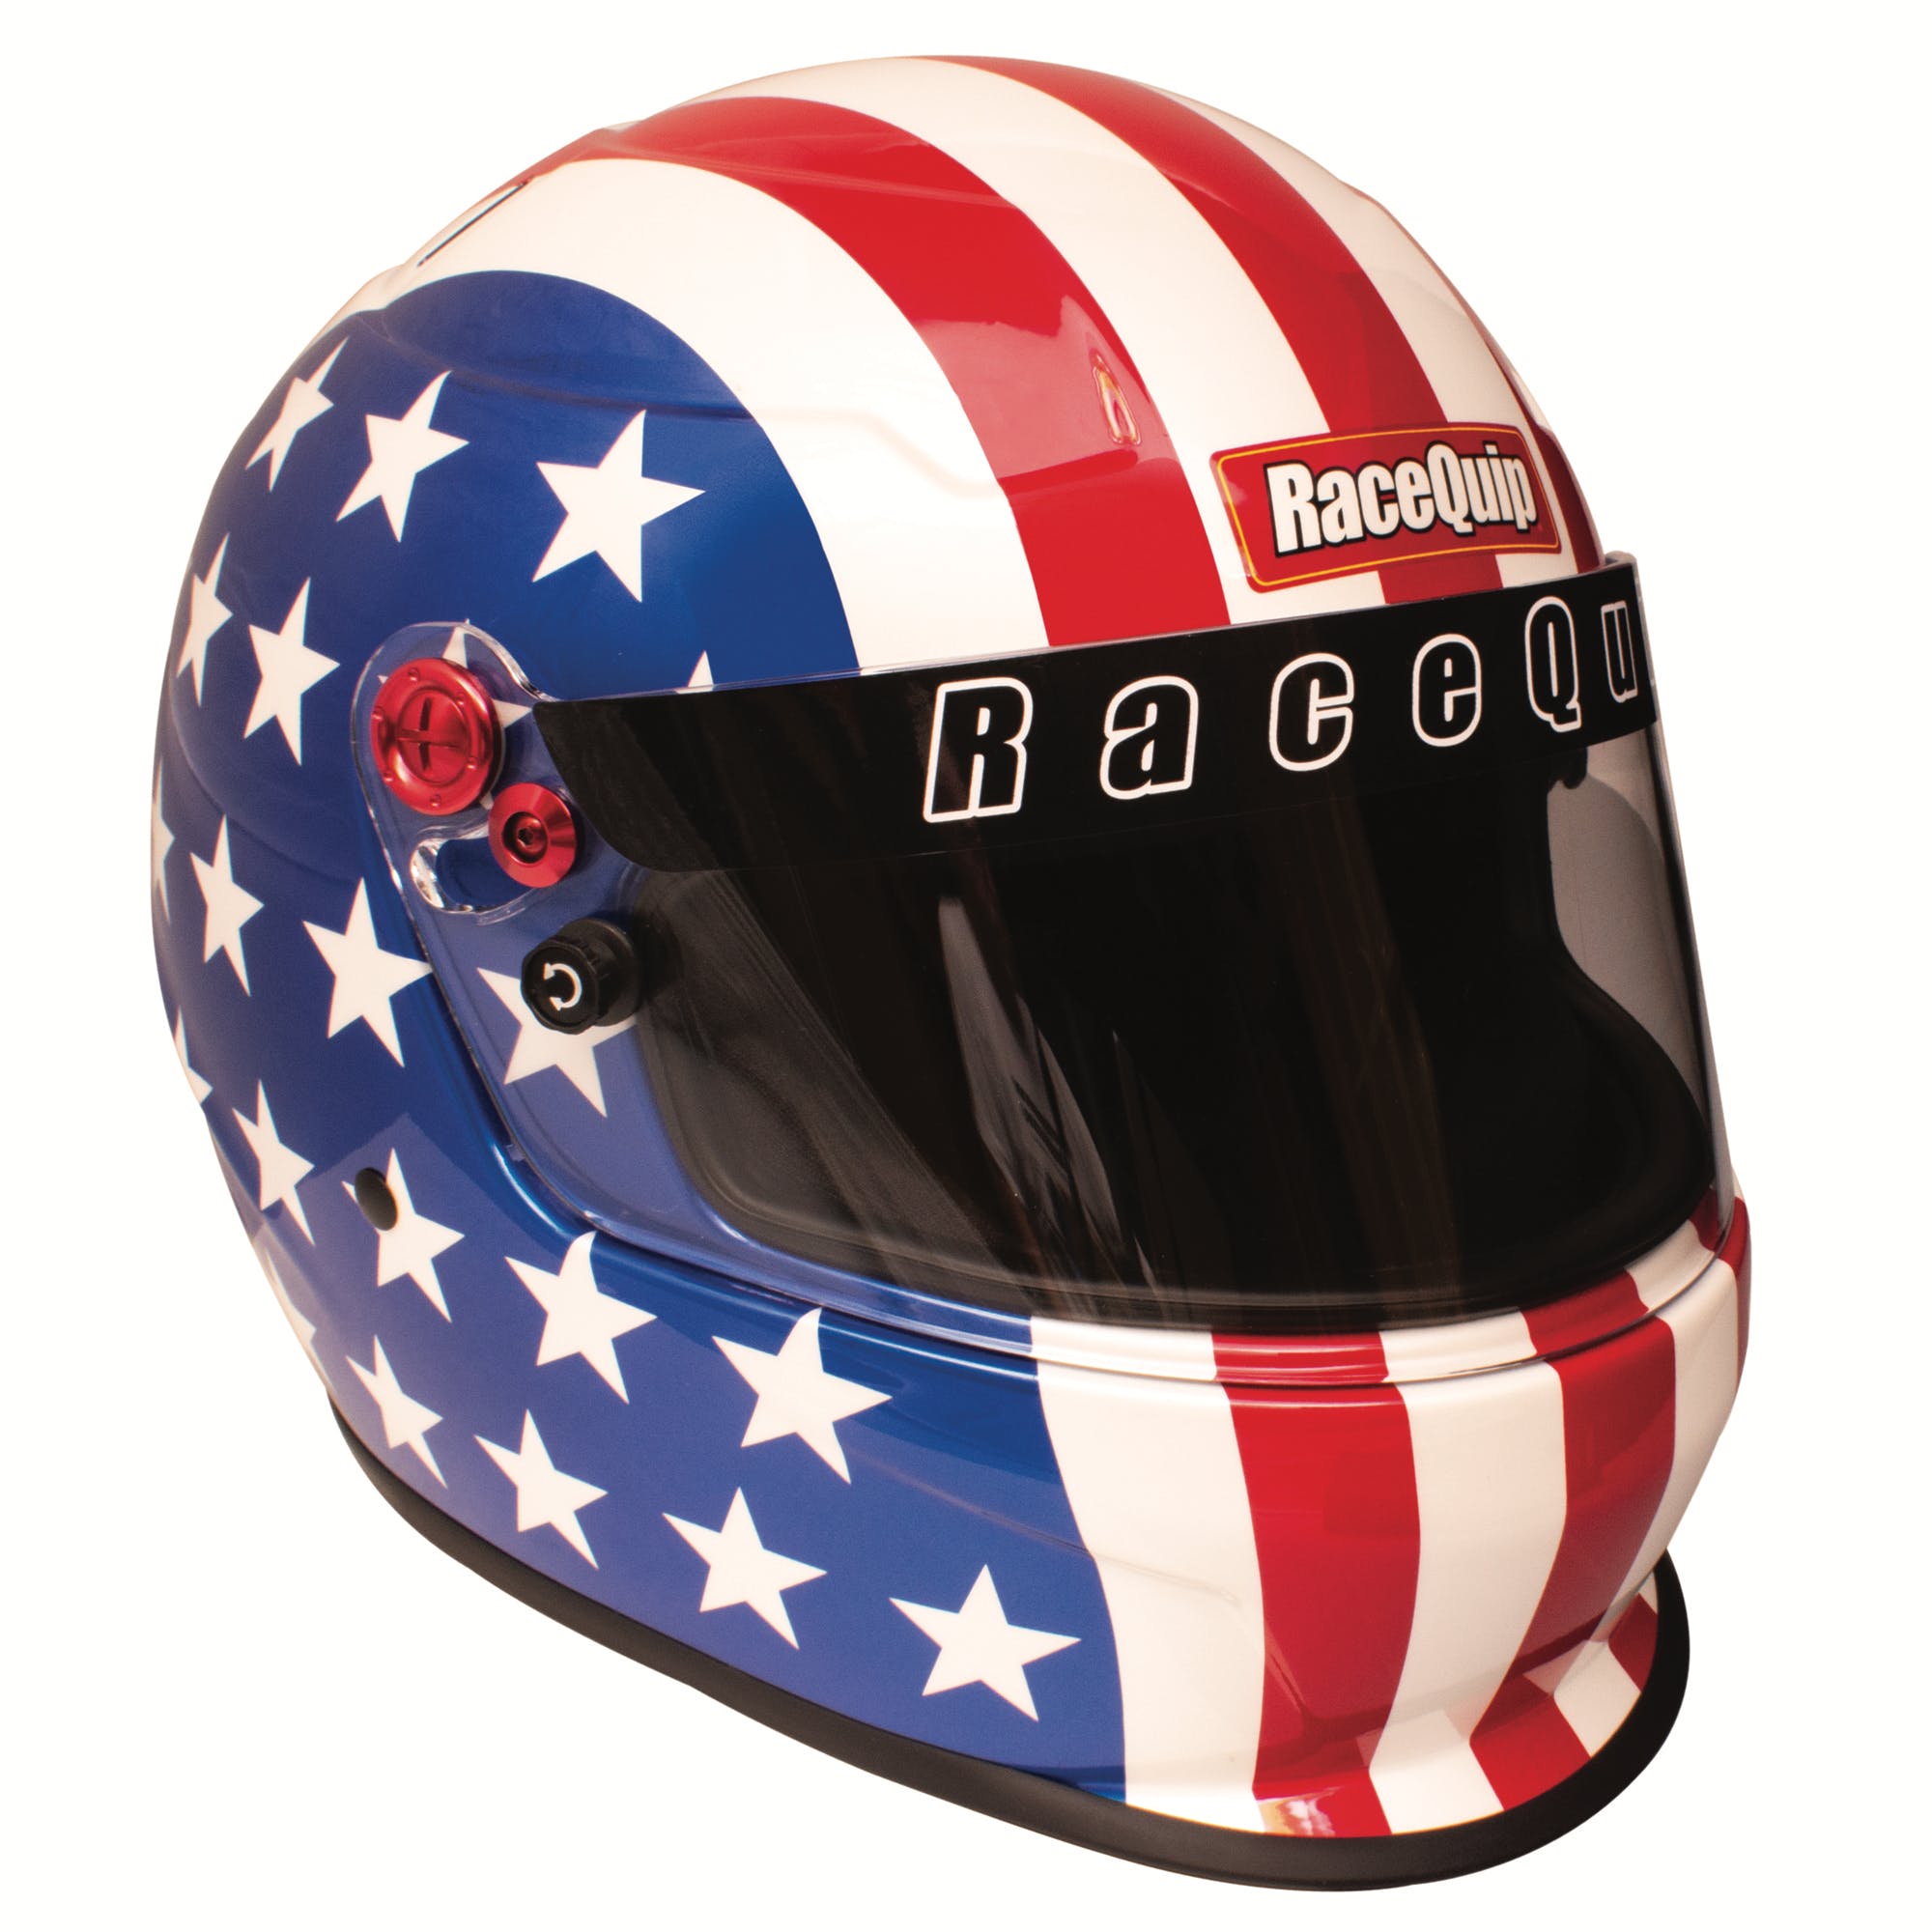 RaceQuip 276122 PRO20 Full Face Helmet Snell SA2020 Rated; America Graphic Small